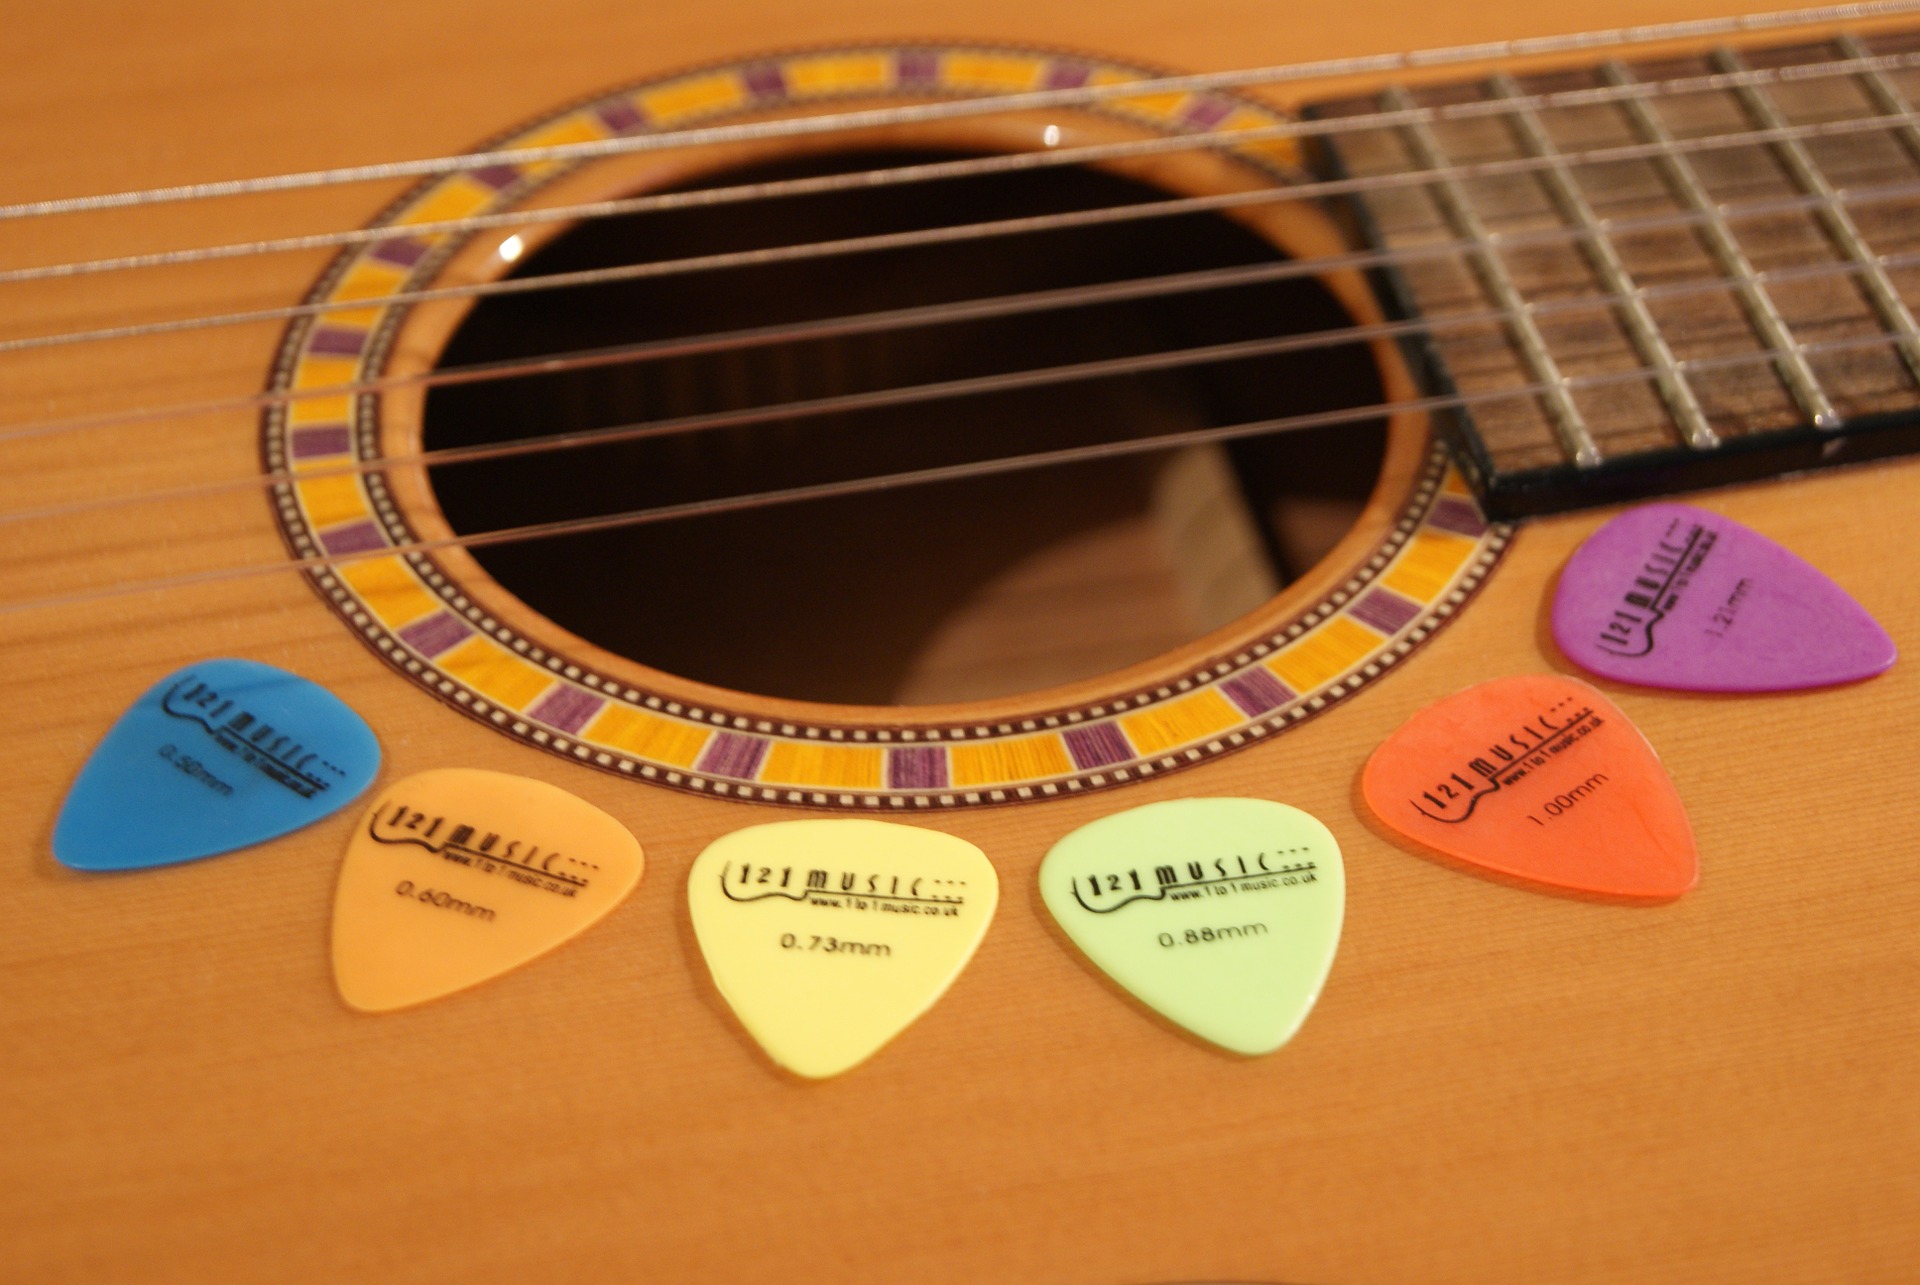 NEW GUITAR PICK FROM CARLOS SANTANA THIS IS THE COLORED PICK HE USES ONSTAGE !